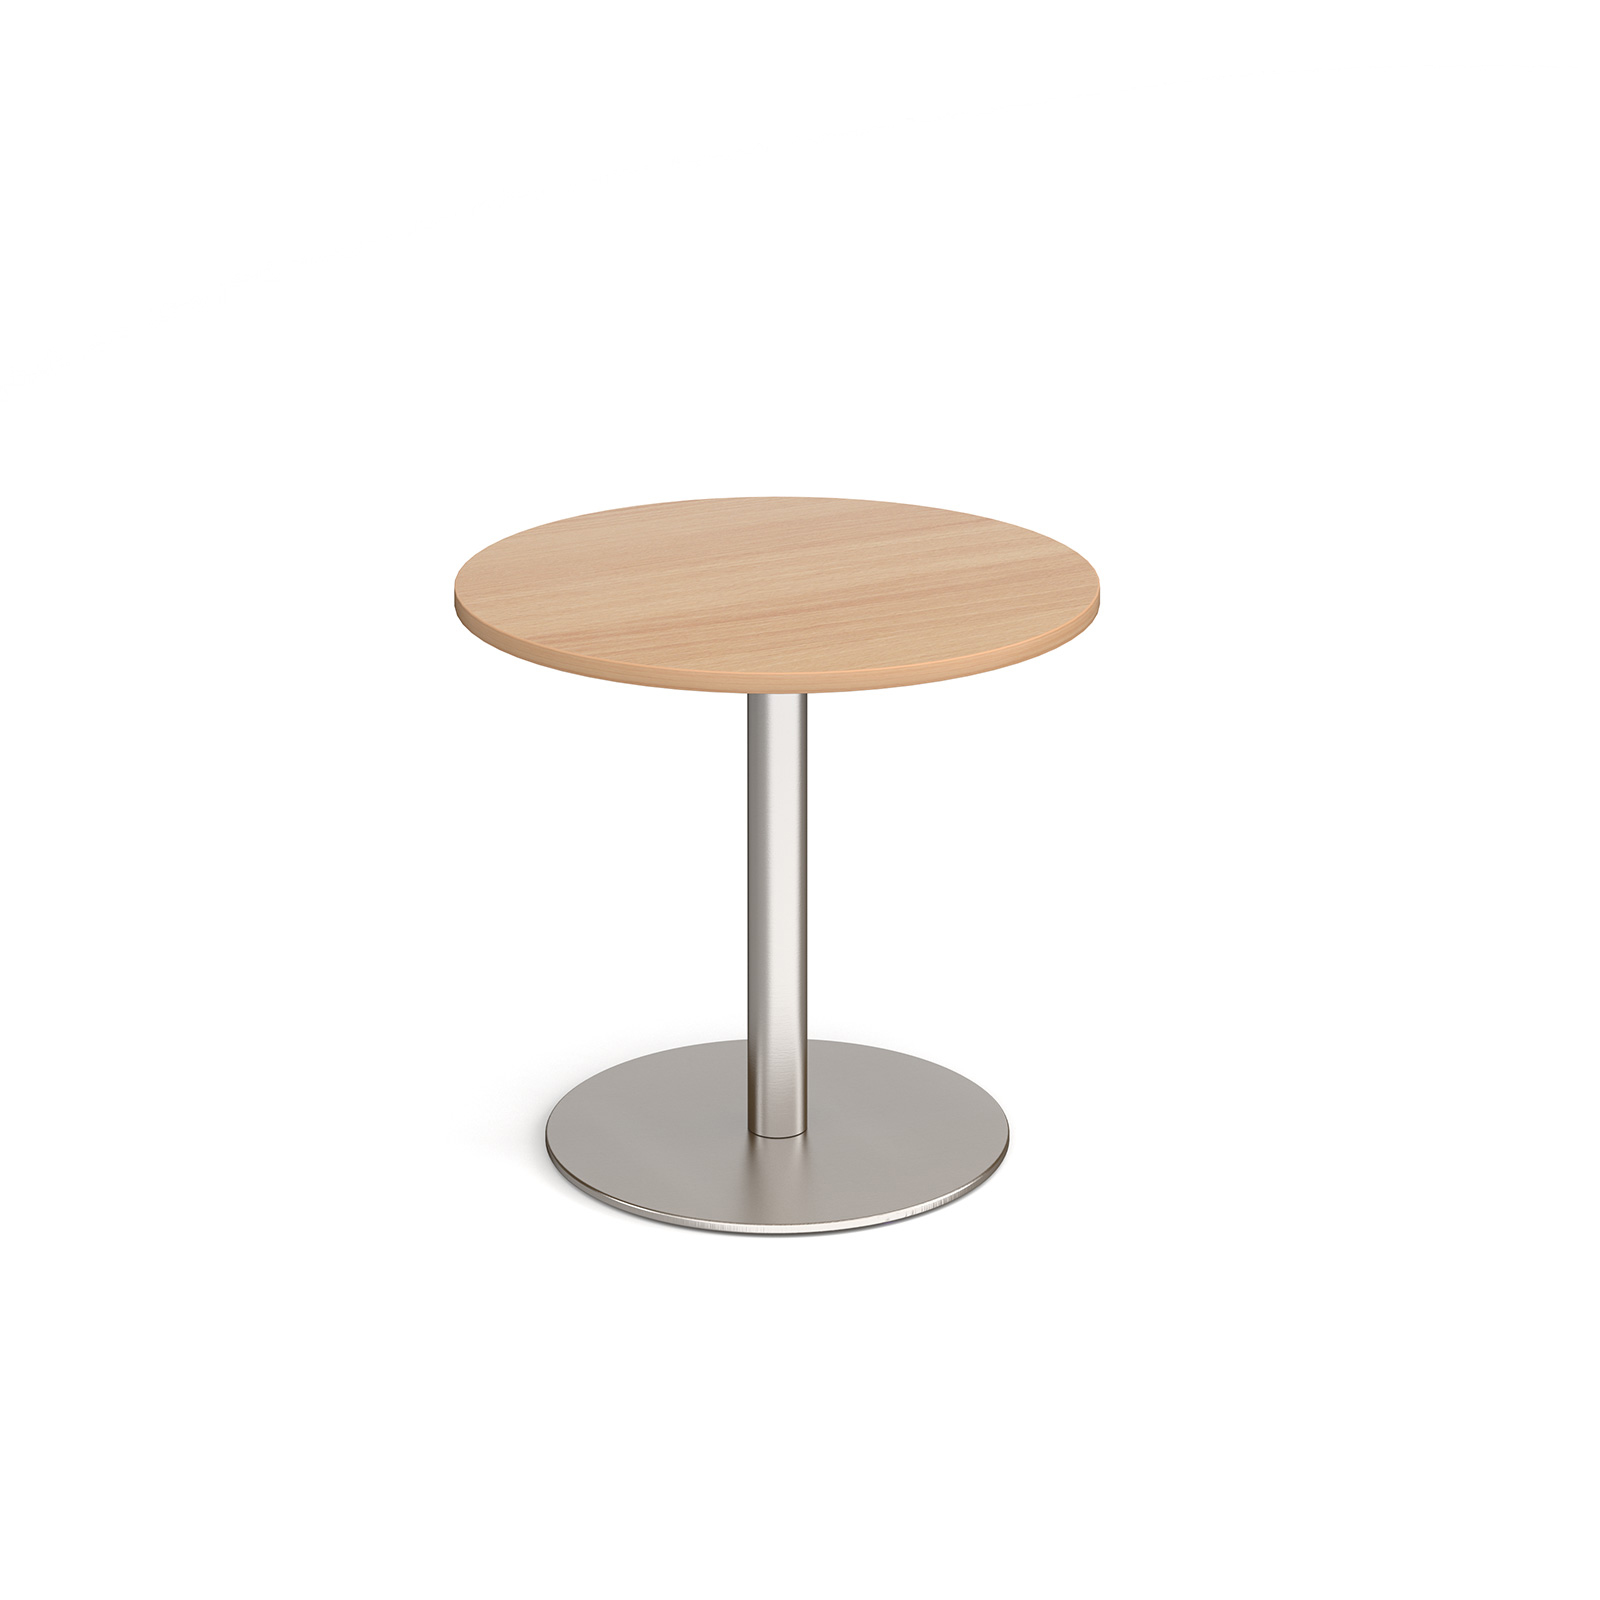 Monza Square Dining Table with Flat Round Base